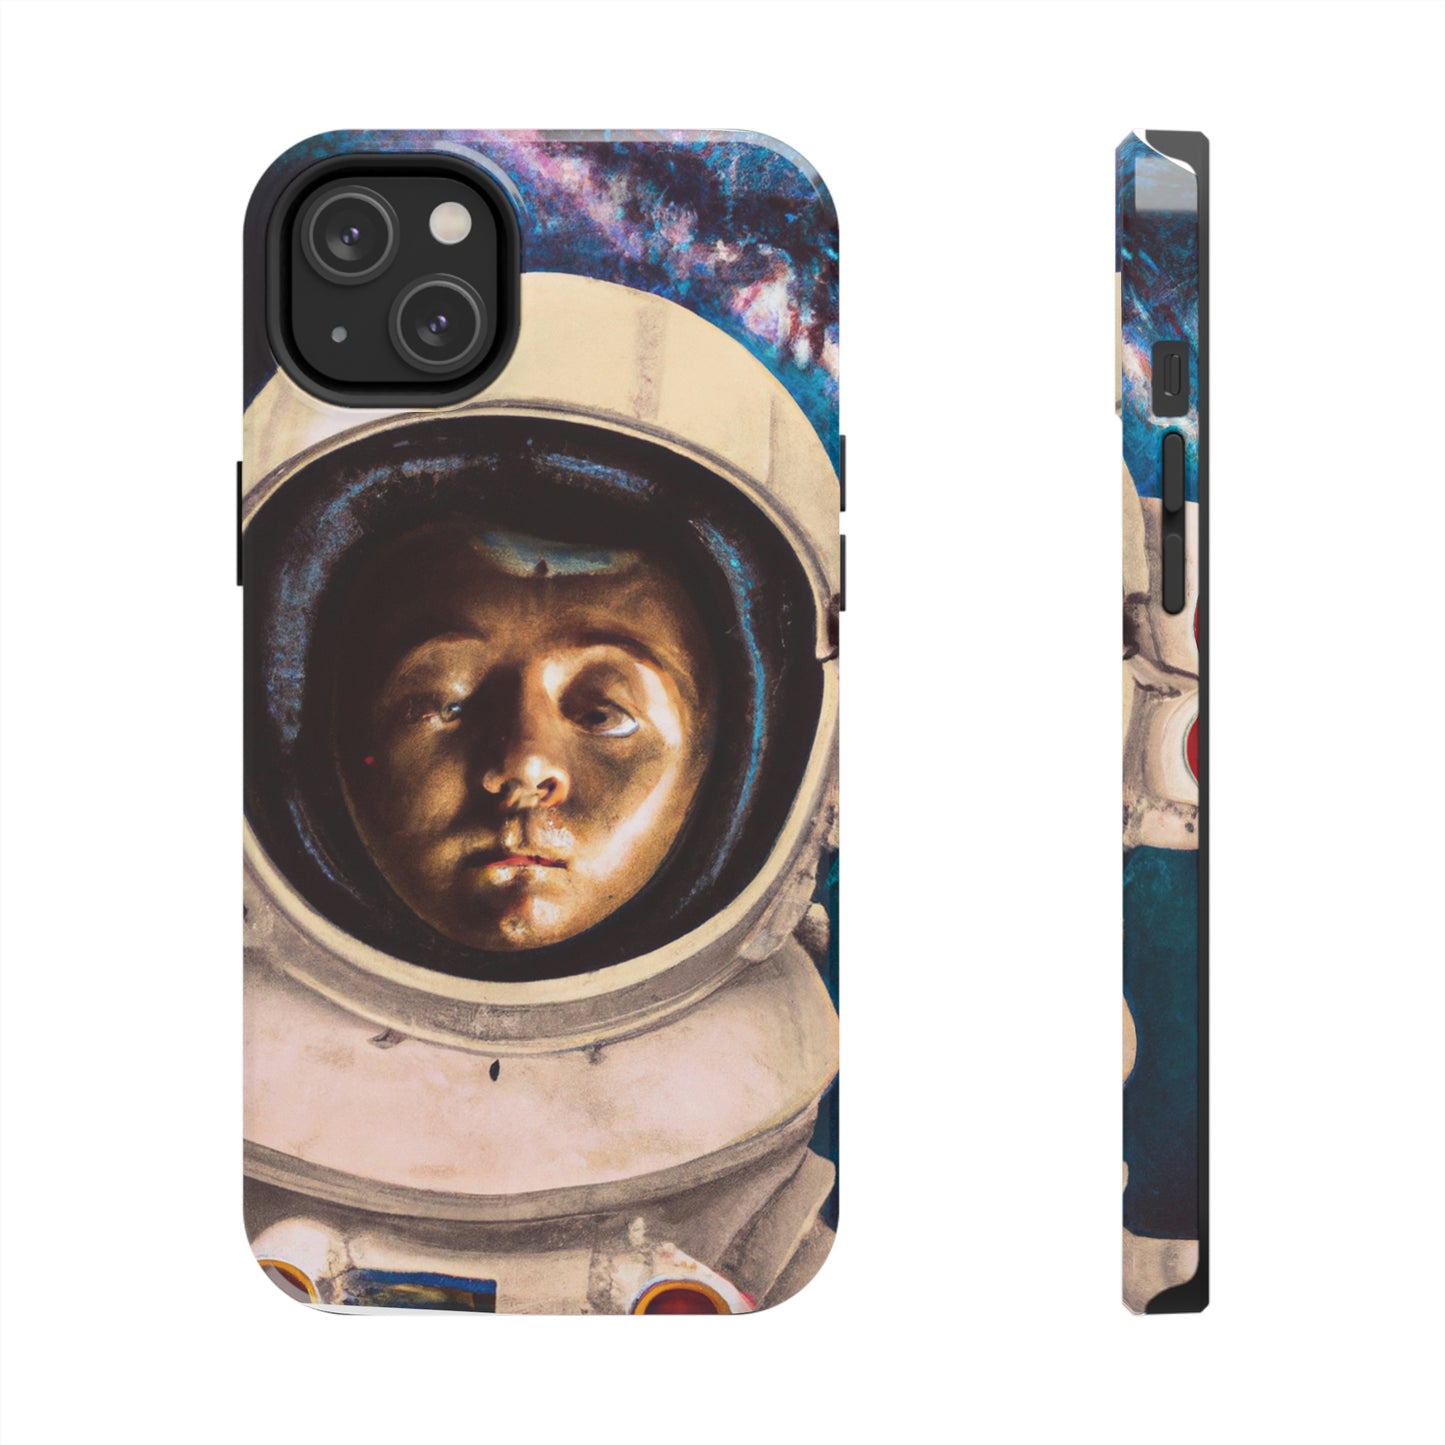 Adventures Beyond the Cosmos: A Young Astronaut's Dream - The Alien Tough Phone Cases